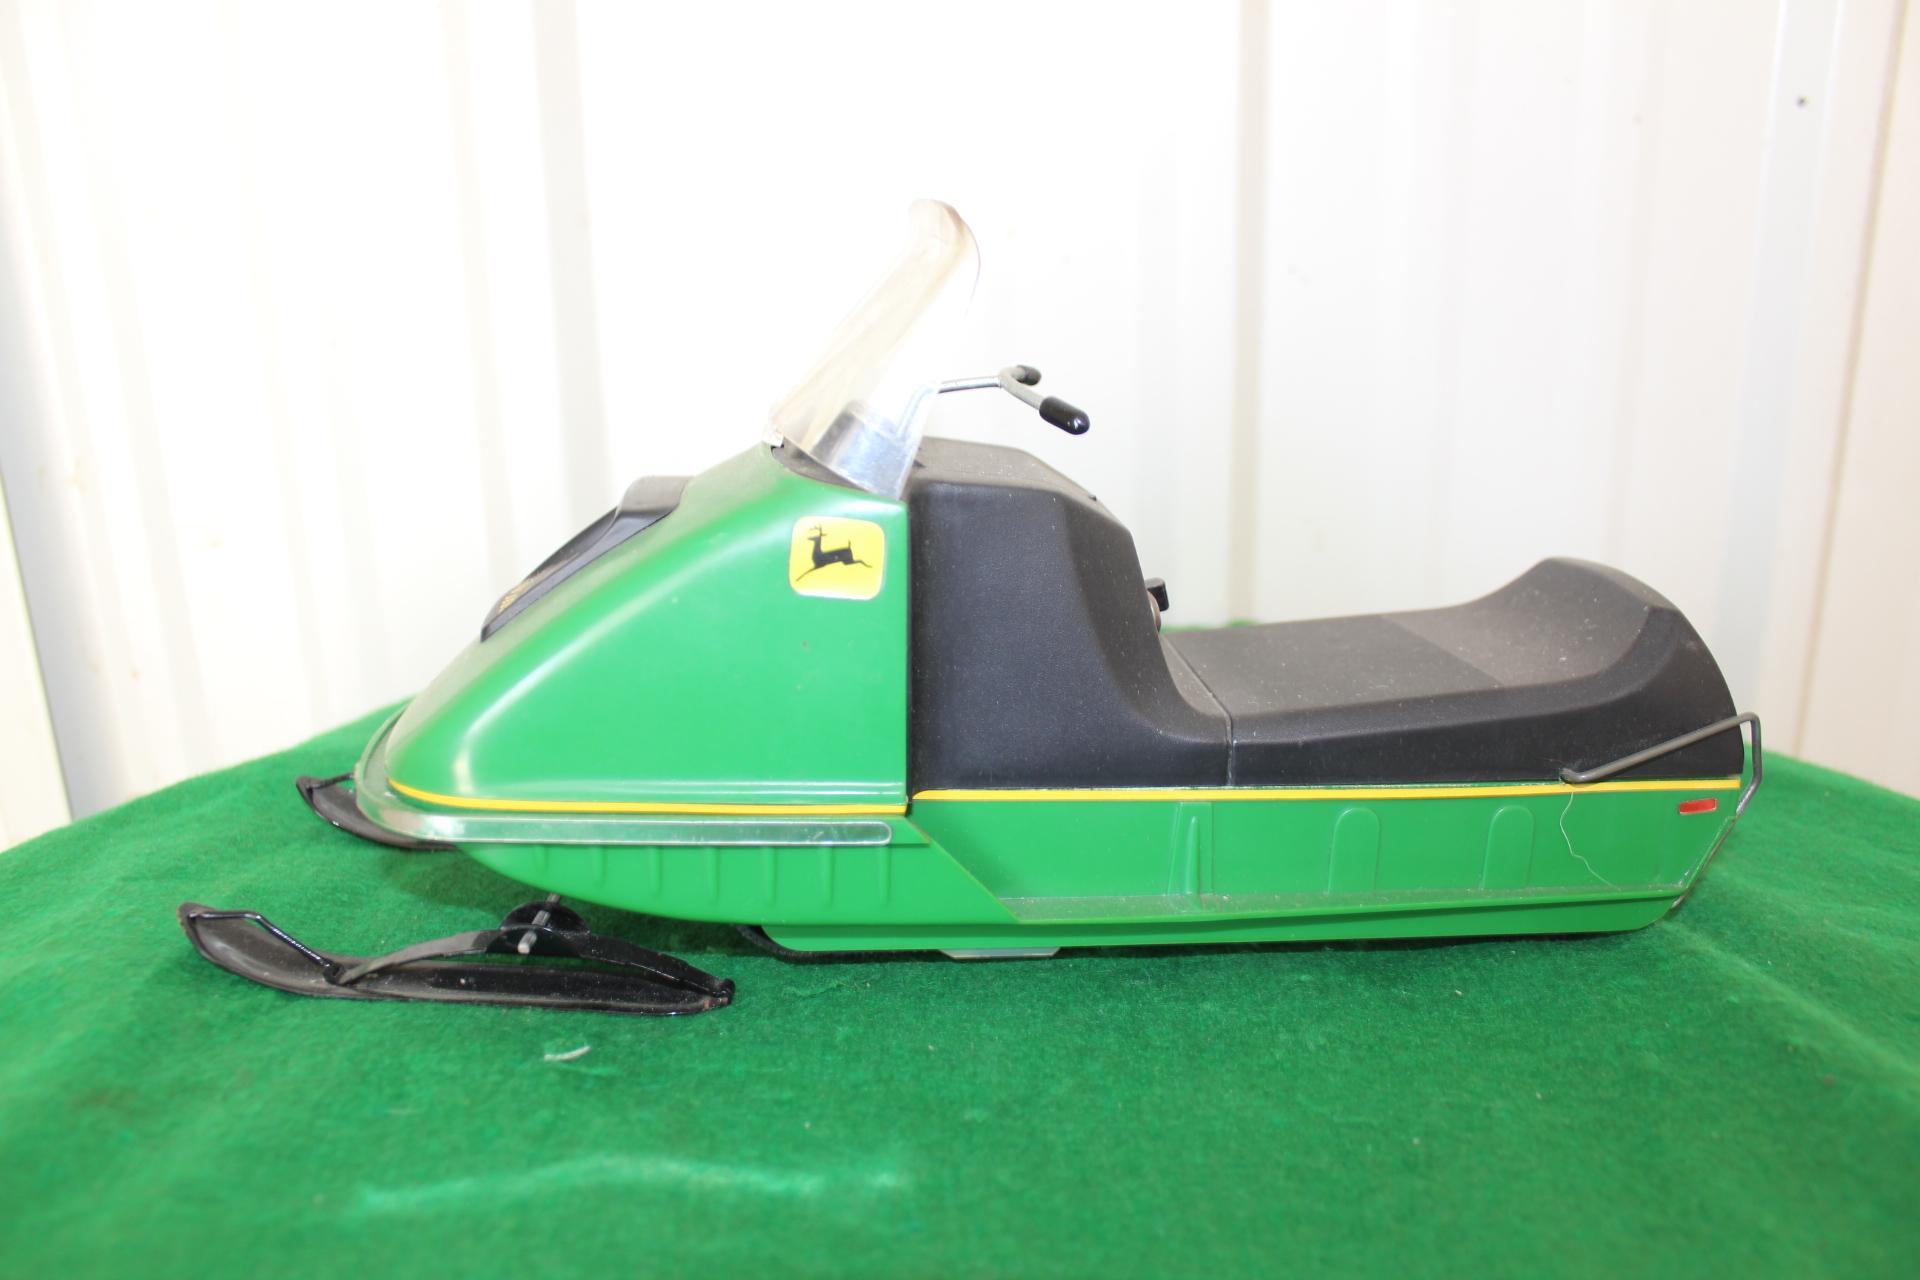 John Deere snowmobile battery operated toy, not tested, no box